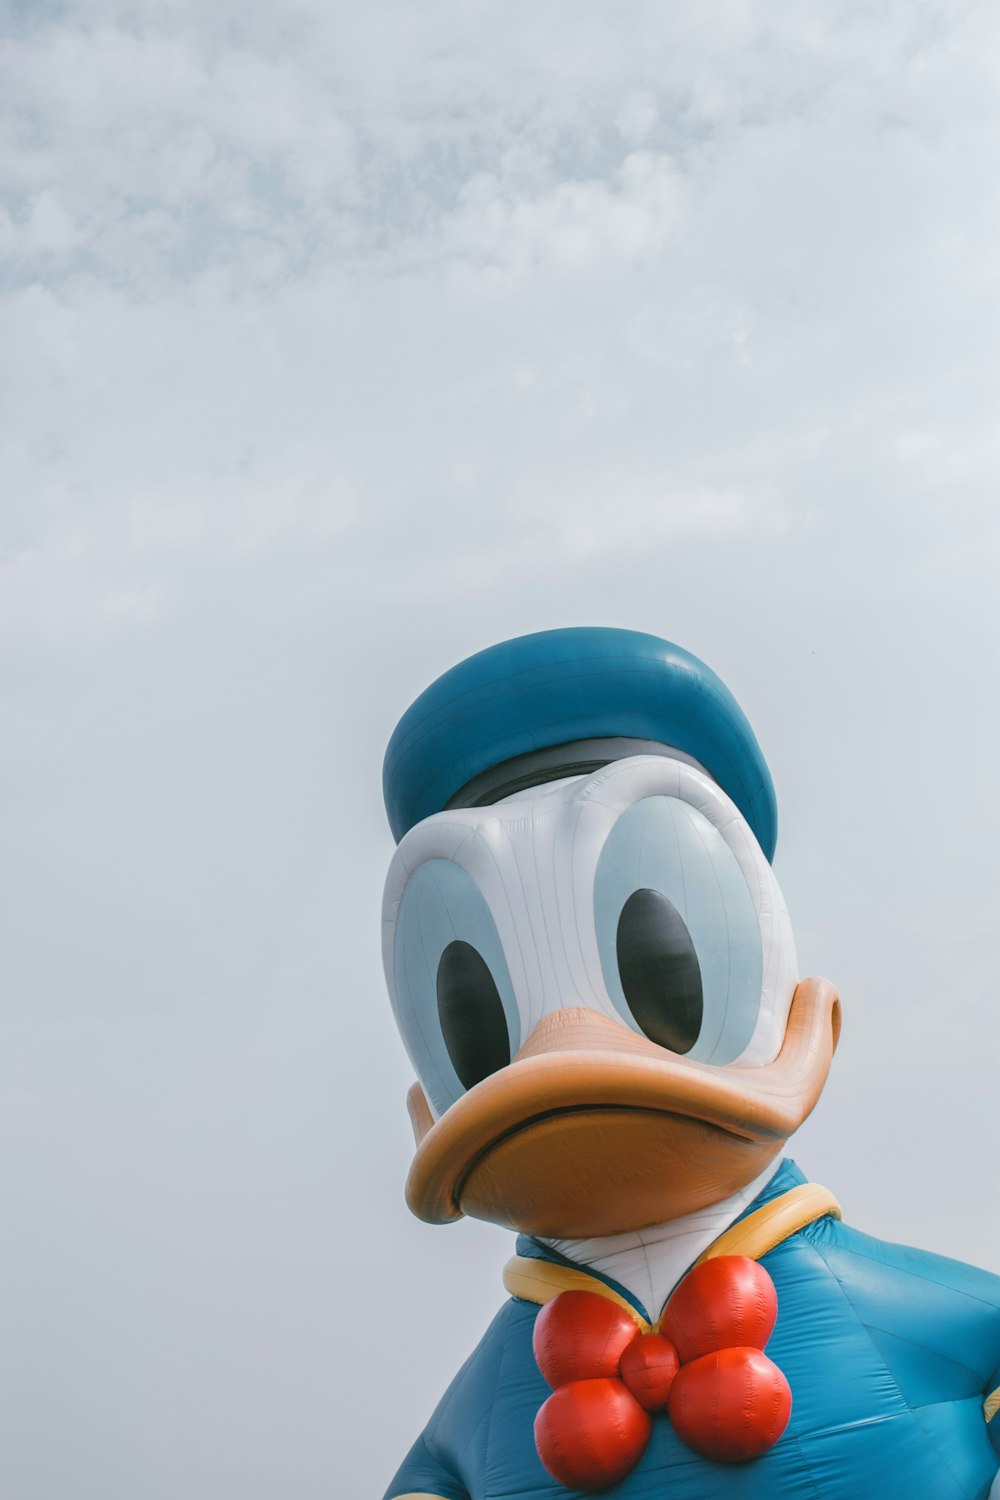 500+ Donald Duck Pictures [HD] | Download Free Images on Unsplash